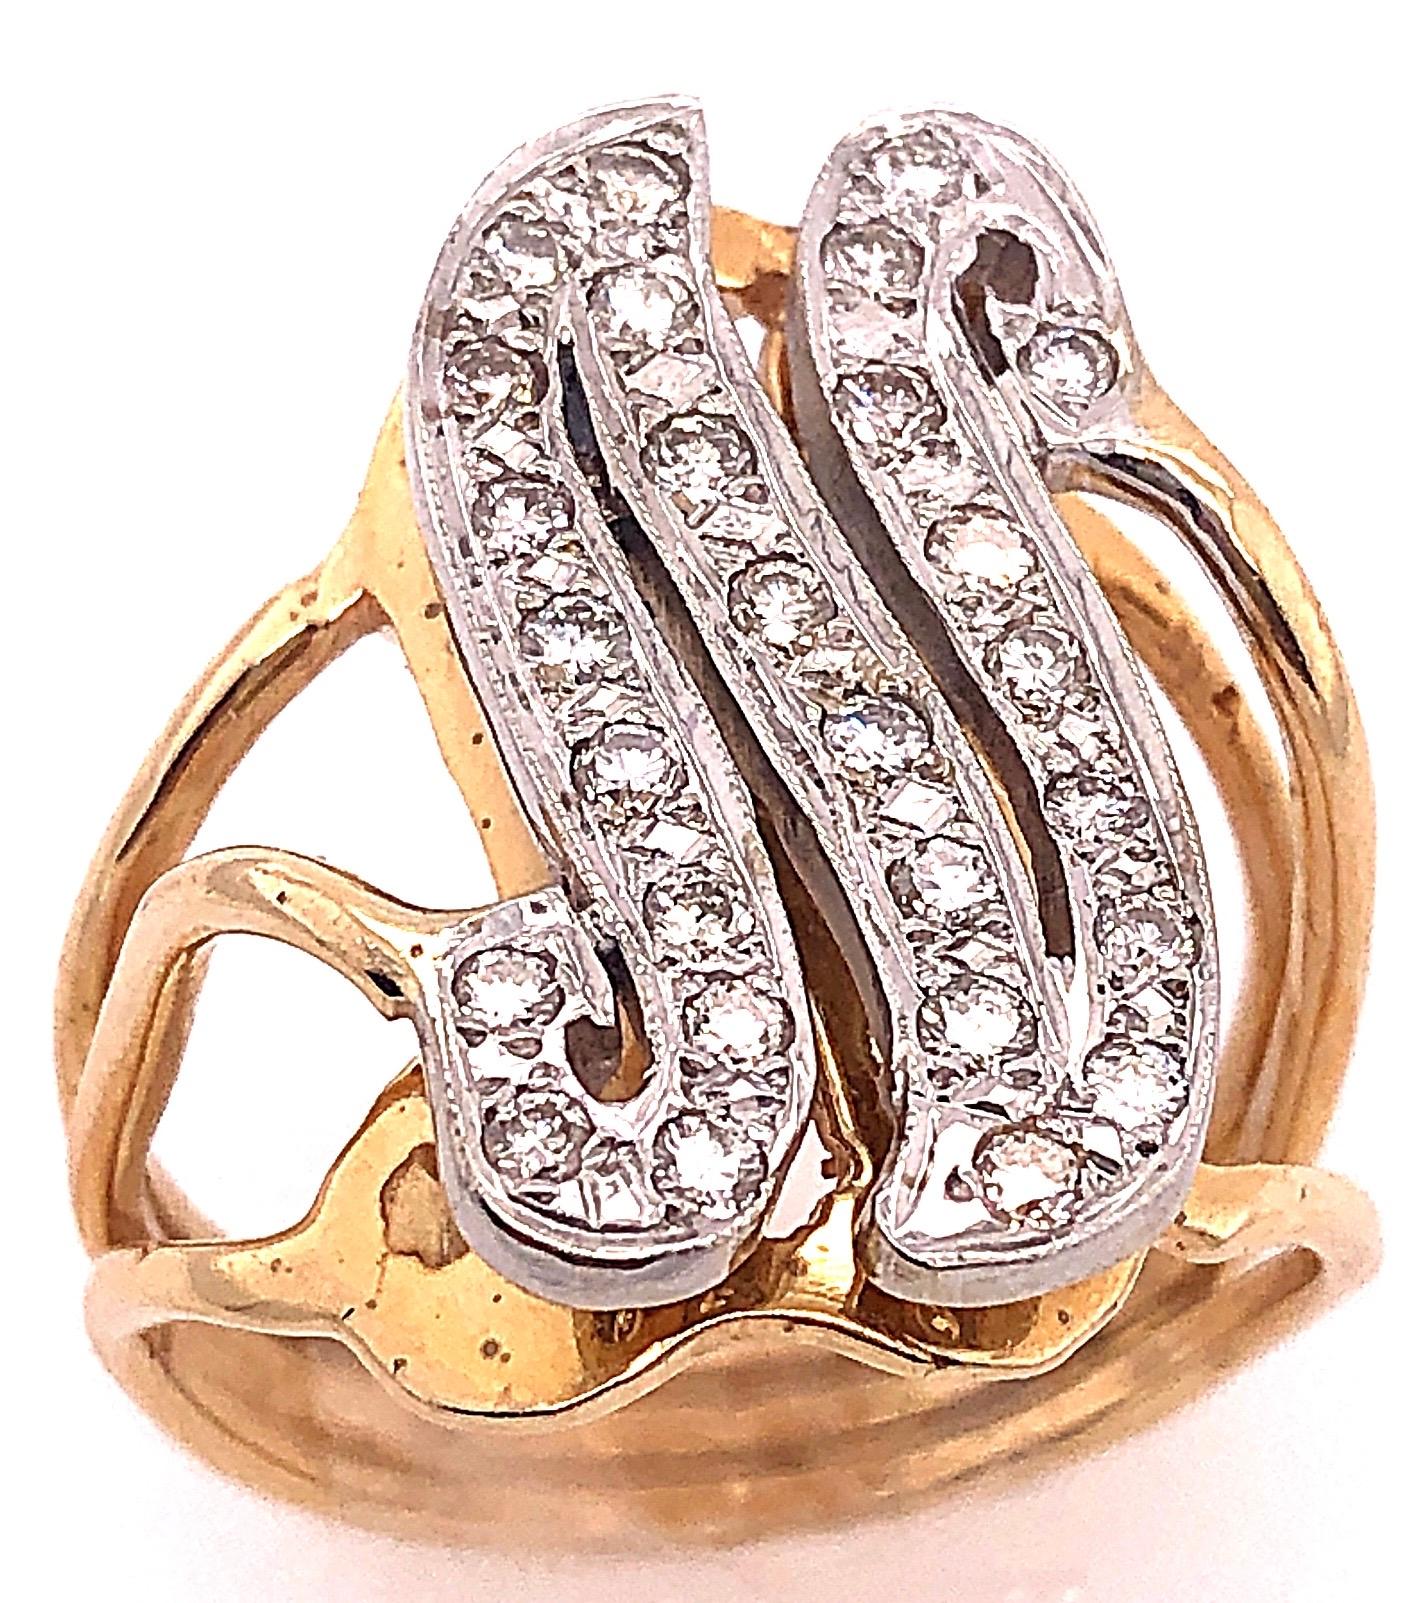 14 Karat Two Tone Yellow and Gold Diamond Initial N Ring
27 piece round diamonds with 0.80 total weight.
Size 9.5 
9 grams total weight.
Initial's height: 23 mm width: 13 mm
